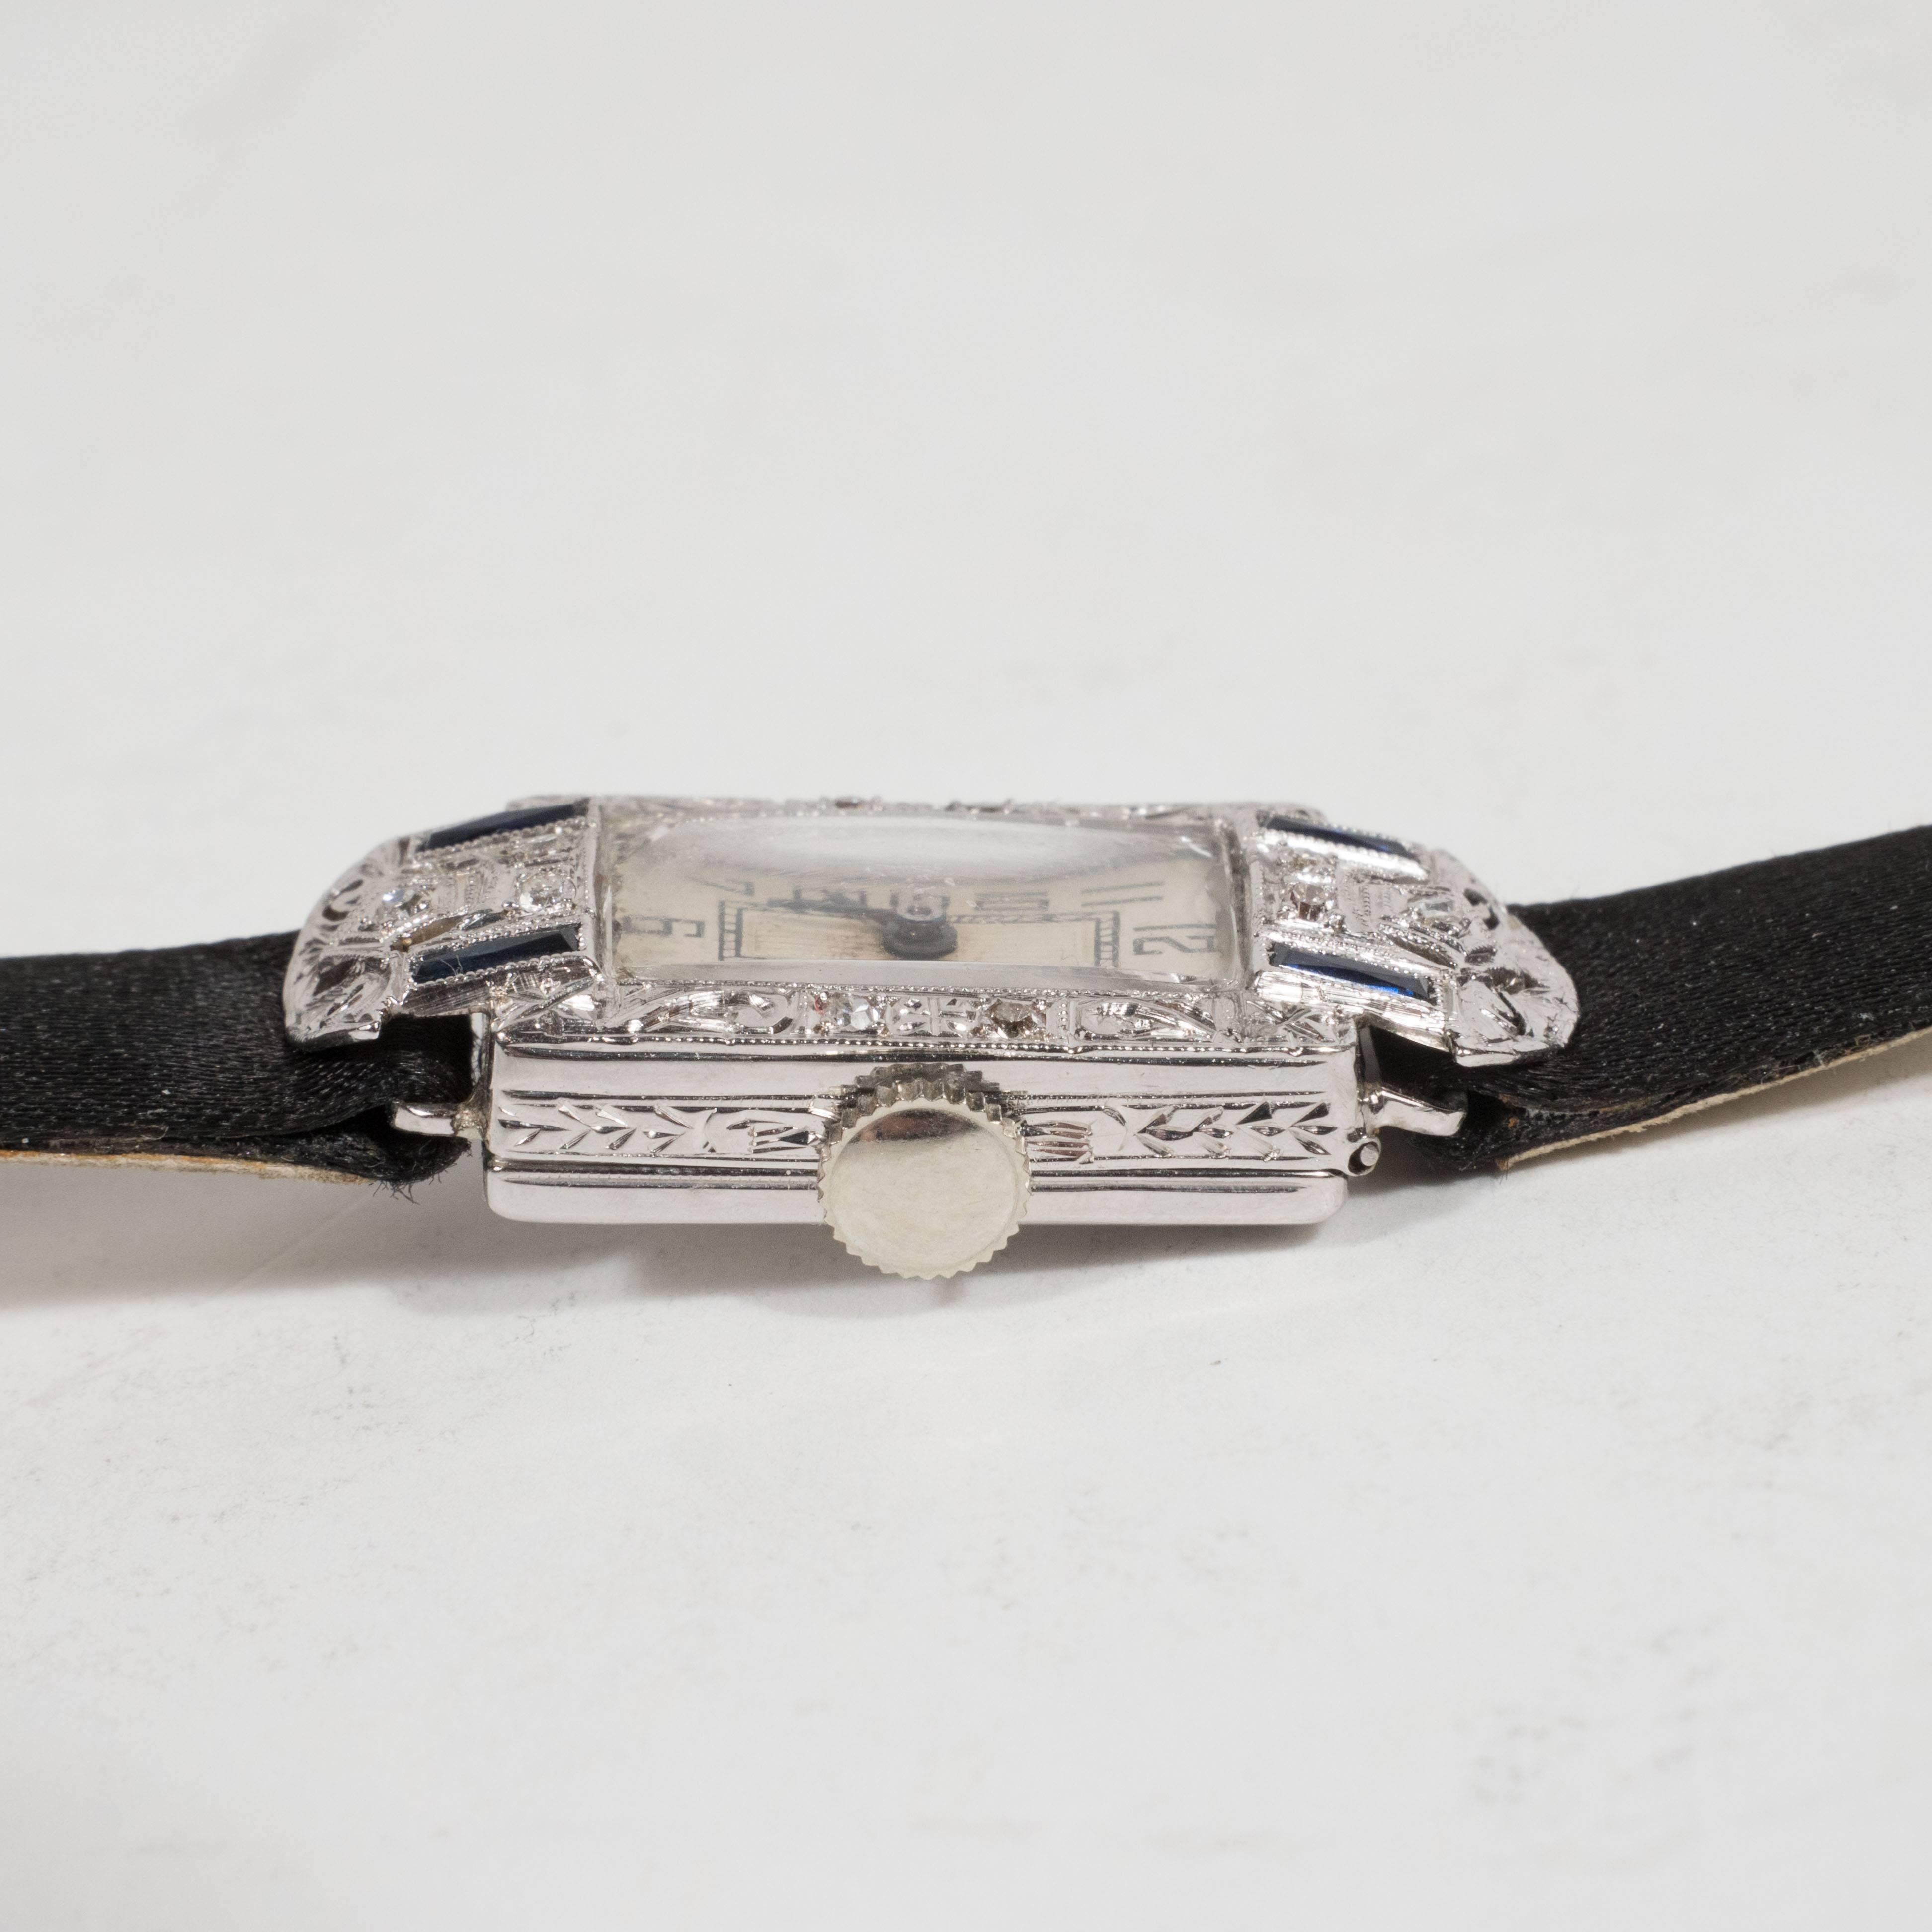 Exquisite White Gold Sapphire Art Deco Wristwatch with Satin Band 1